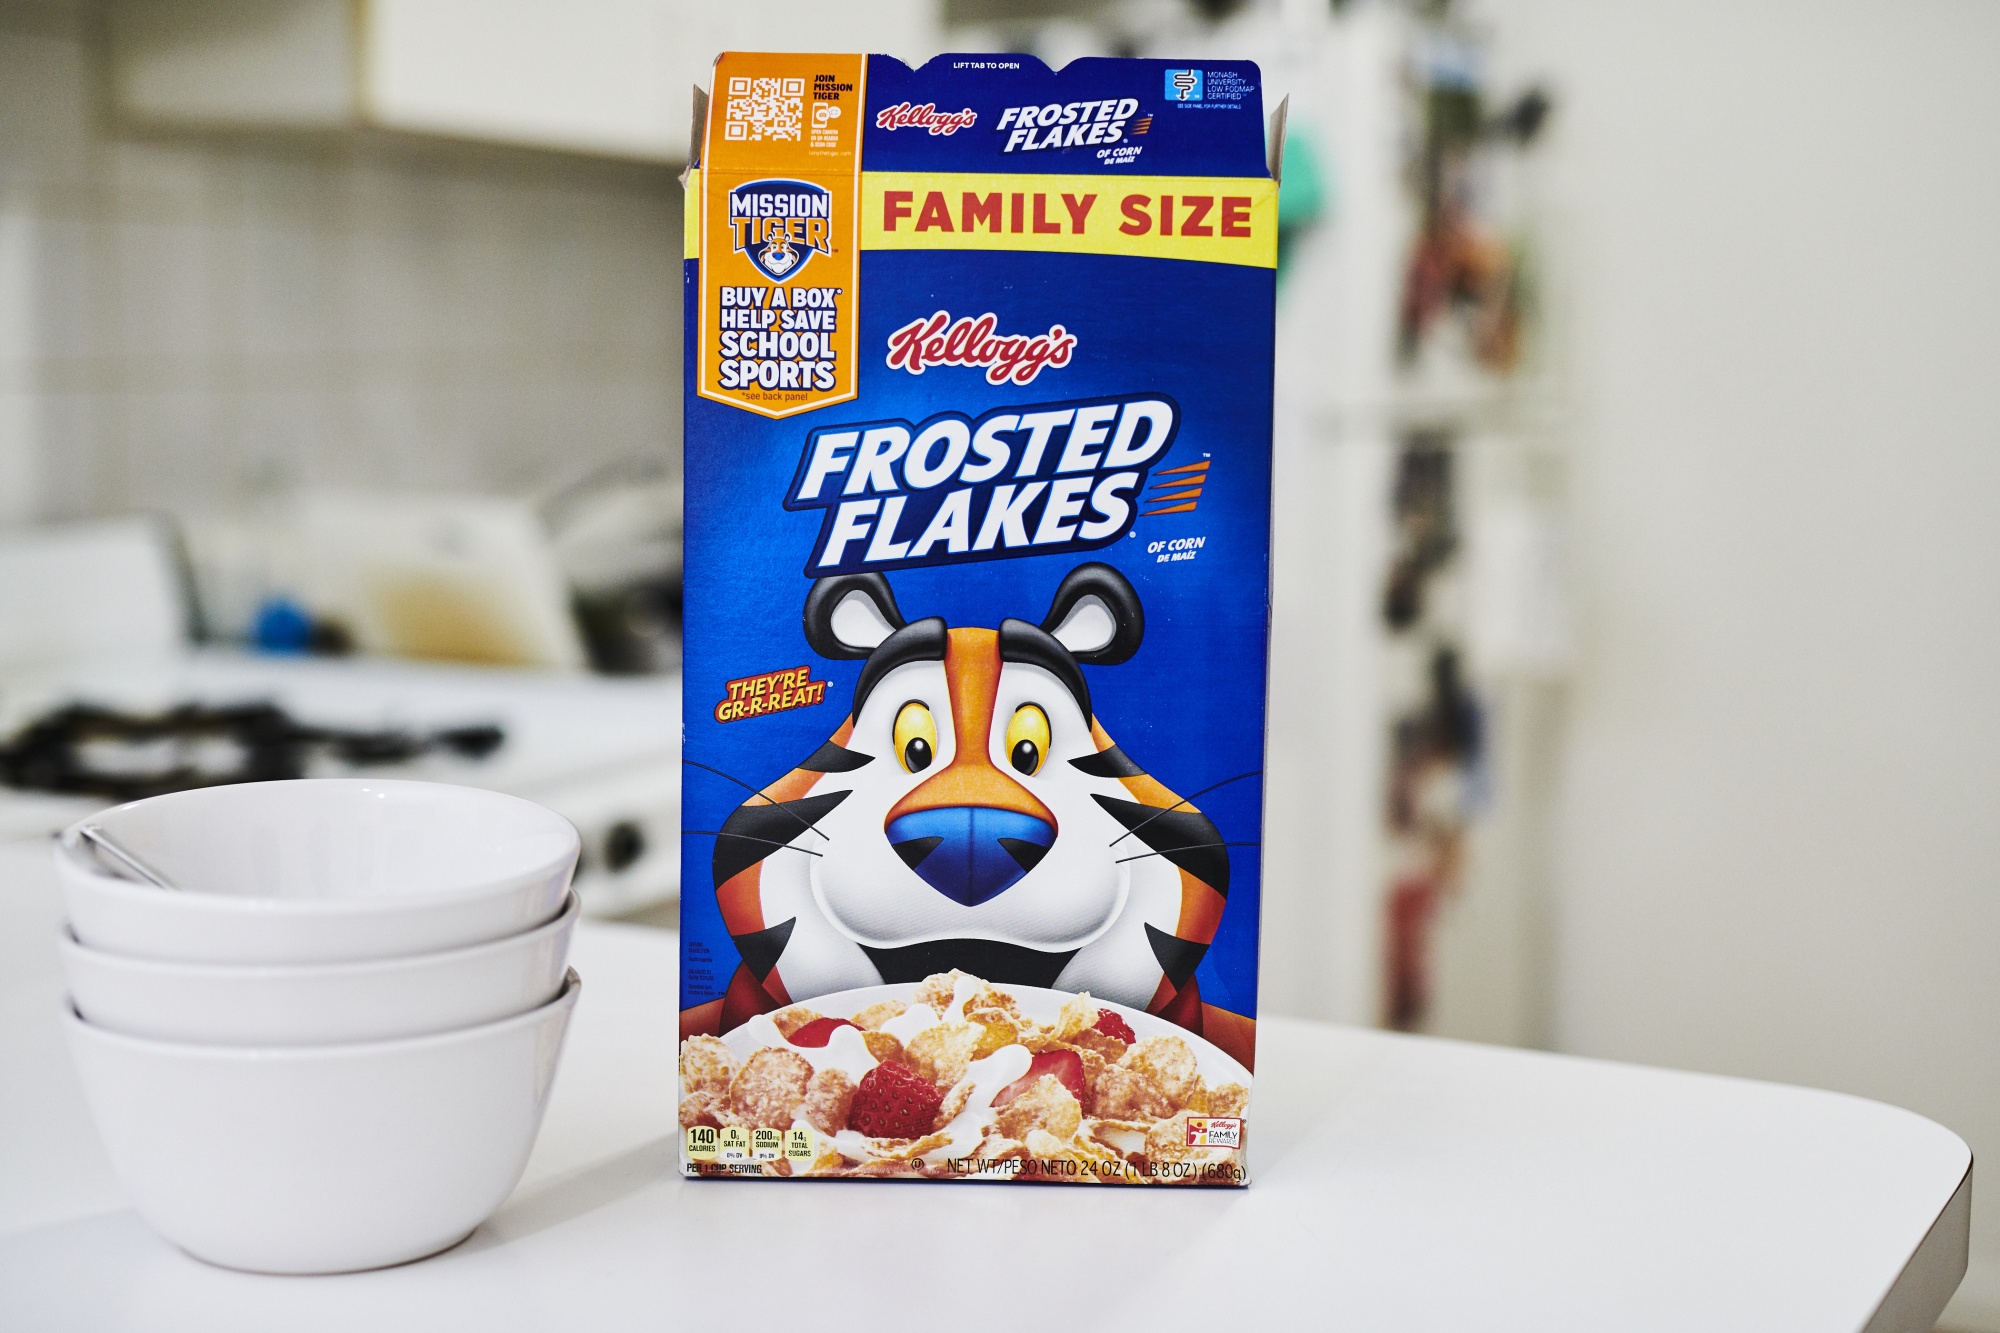 Kellogg Says It's Struggling to Meet Demand for Frosted Flakes - Bloomberg